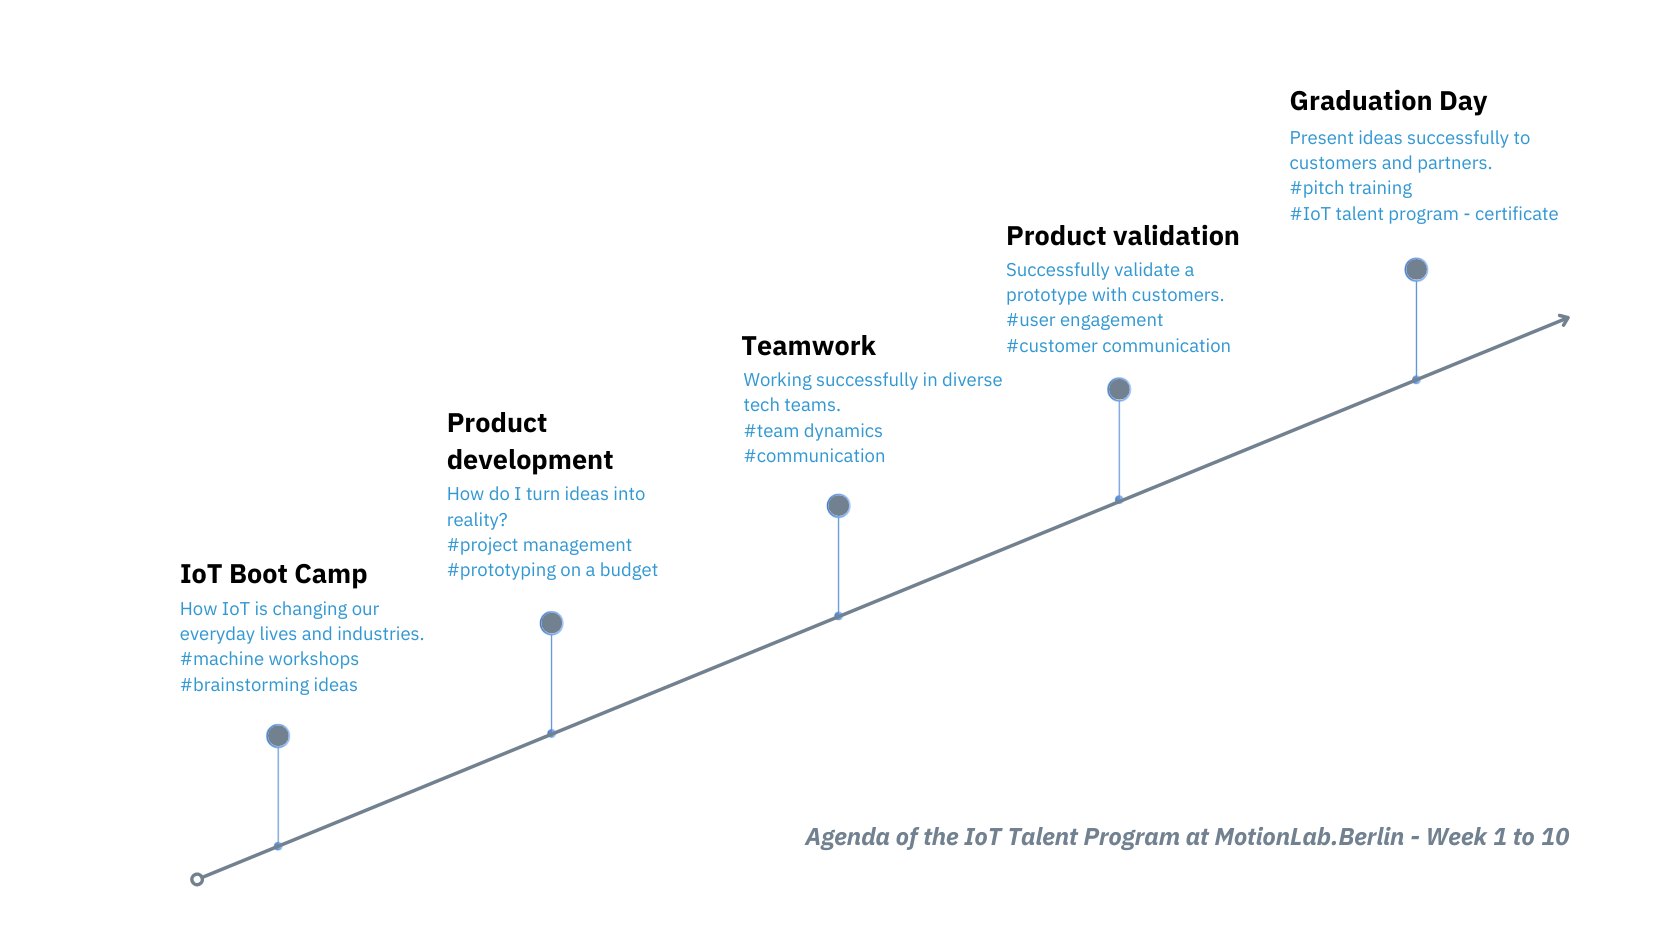 The agenda of the internet of things education program for students.